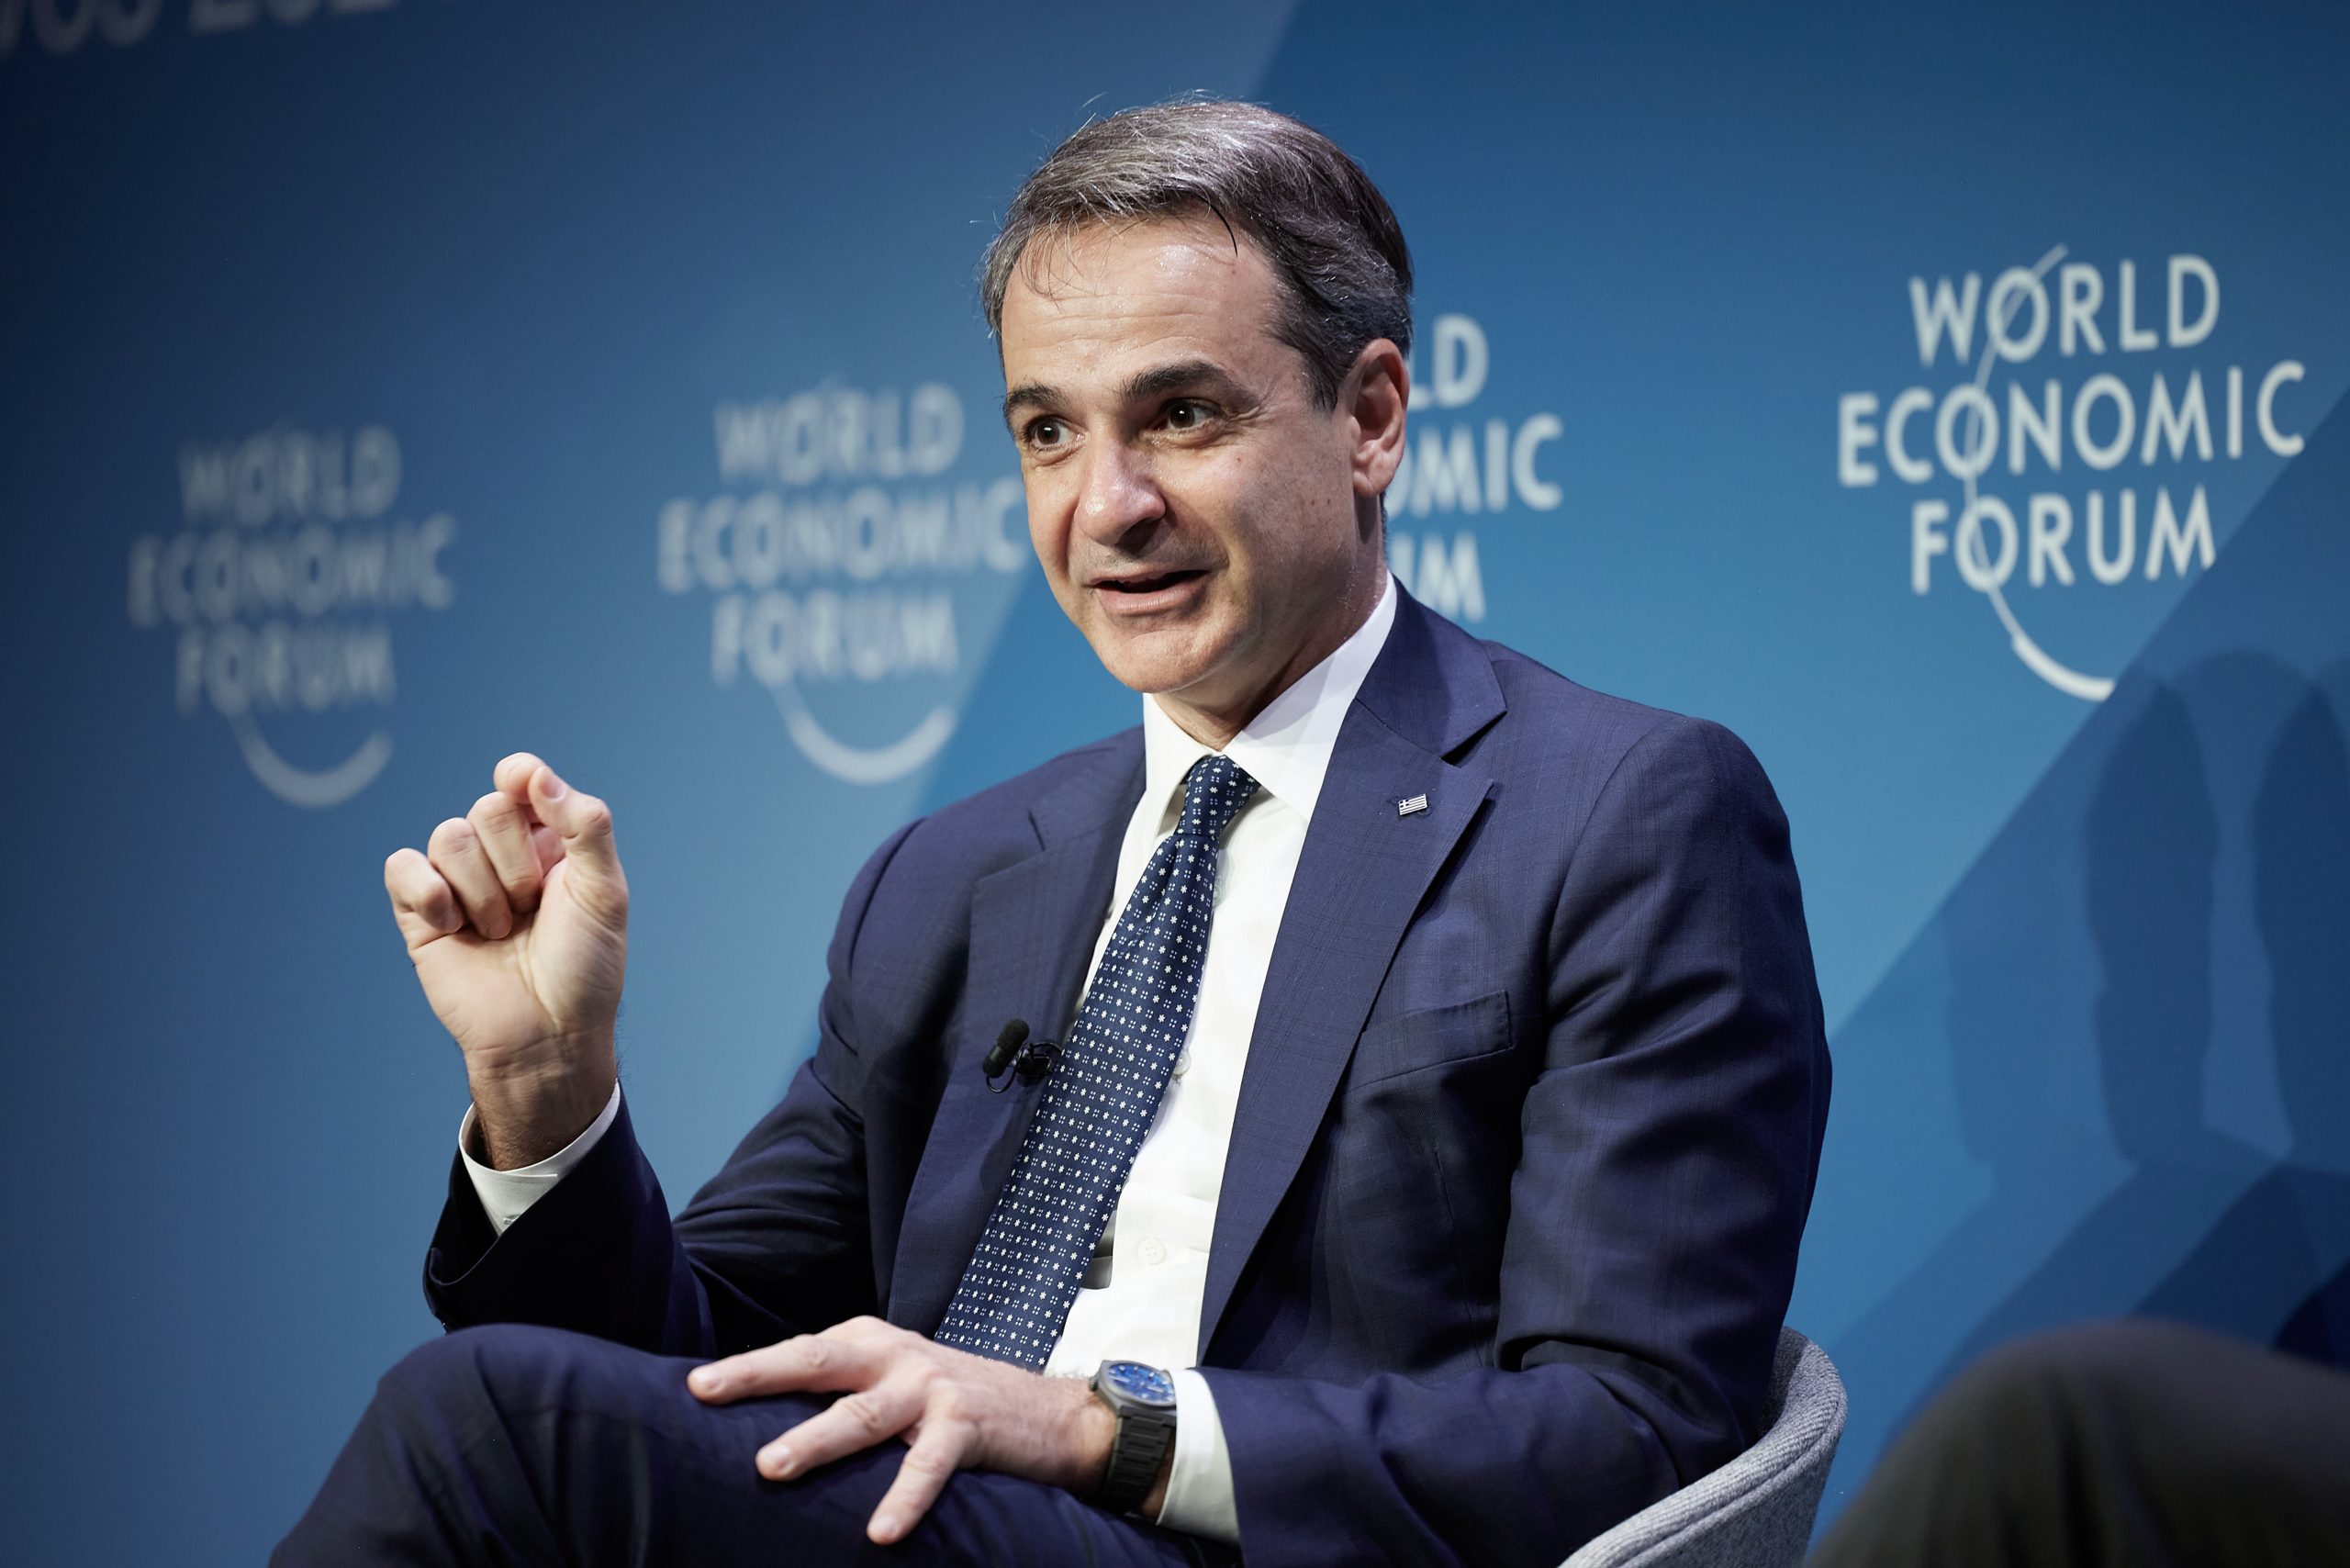 PM Mitsotakis at WEF: “Greece Plans to Become Energy Exporter”